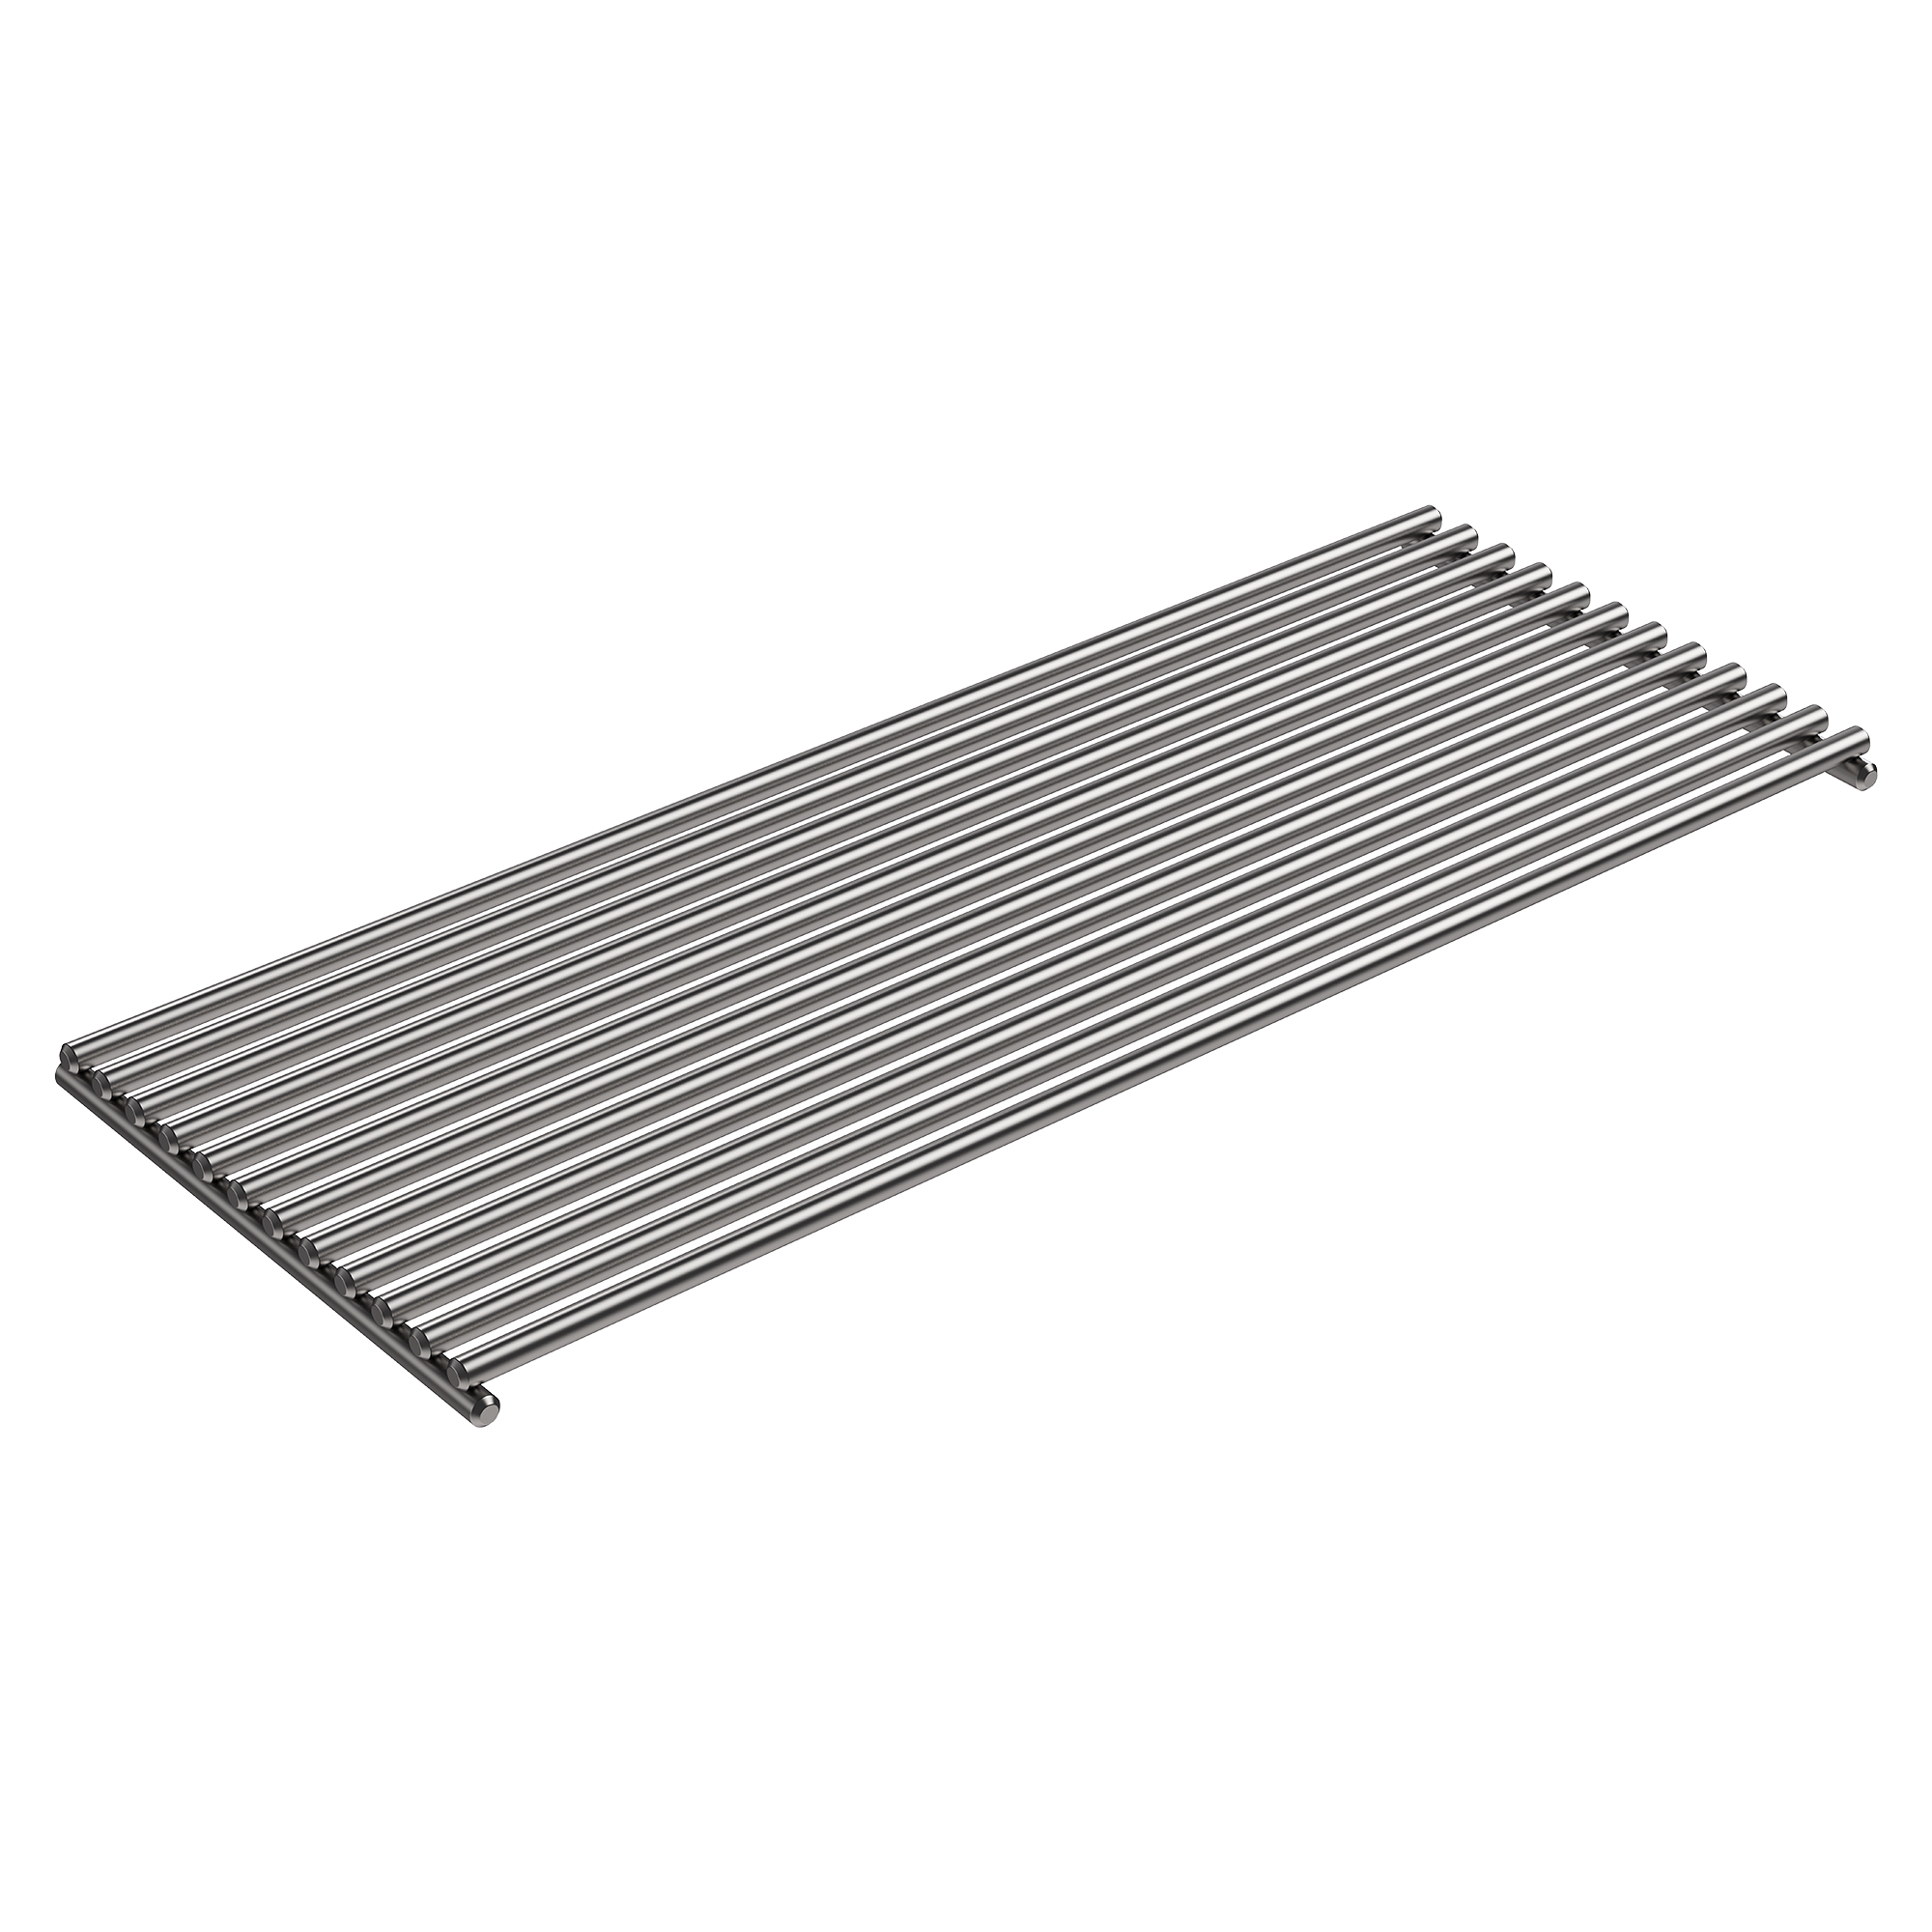 Stainless steel Grill grate Videro 18 x 45 cm (G3,G6 from model year 2021)